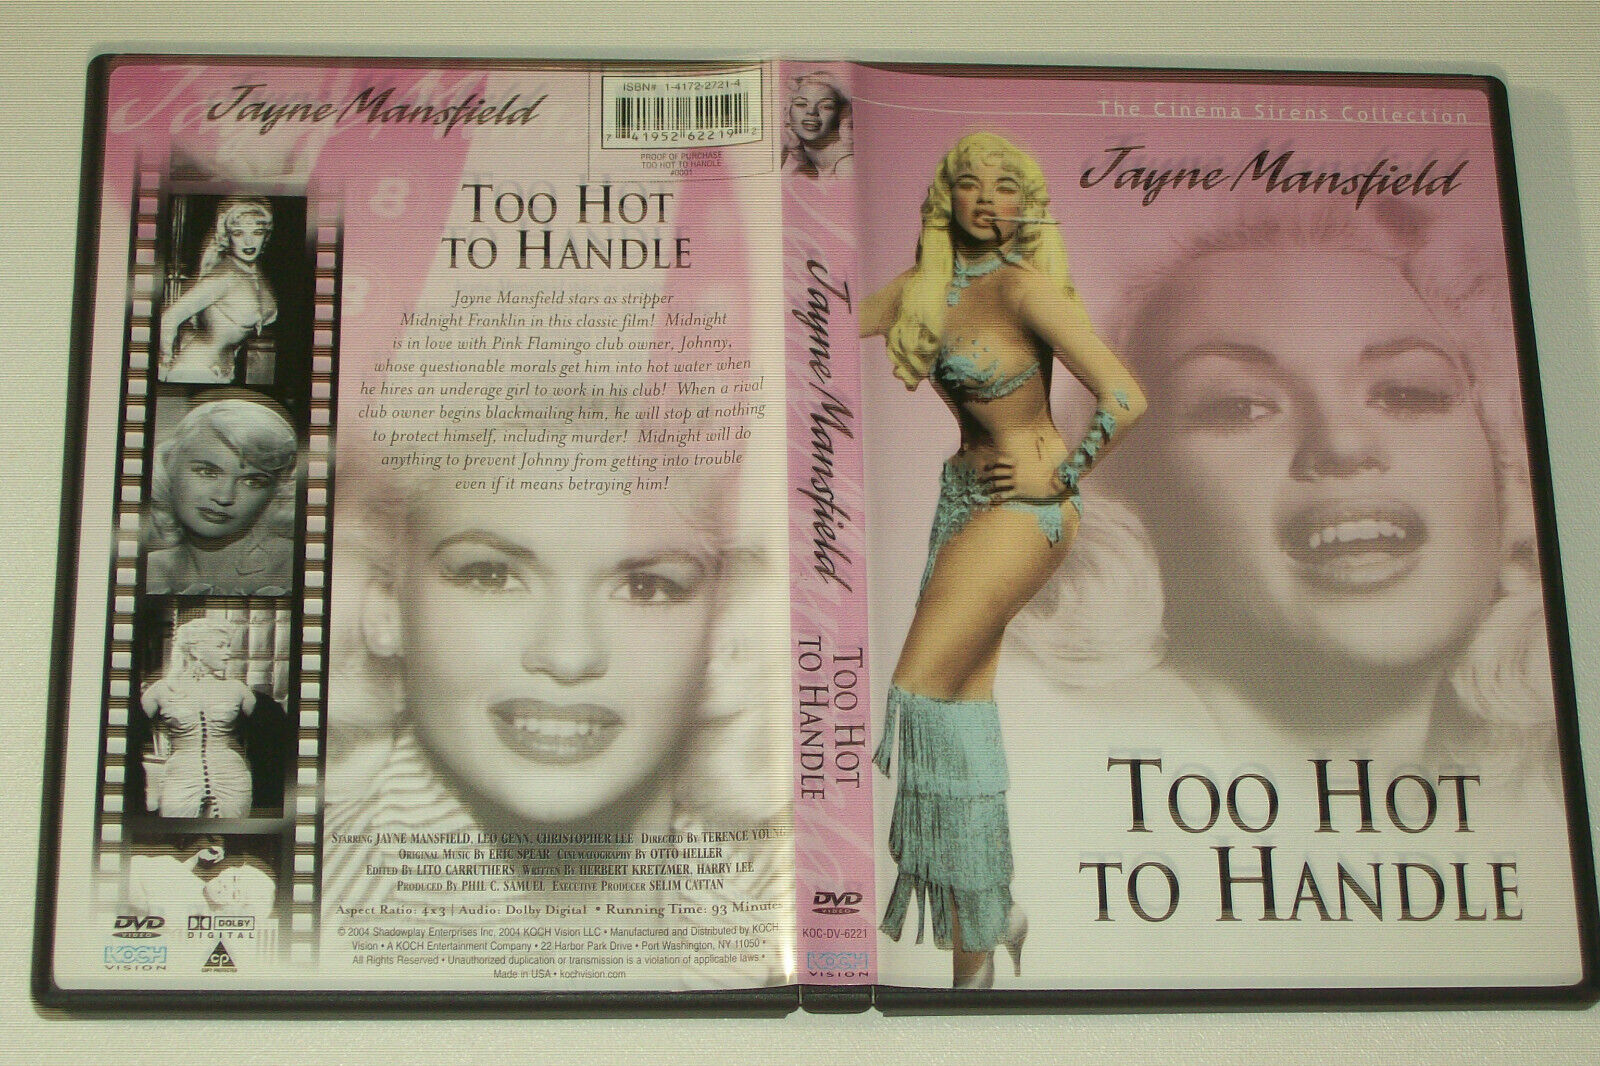 Too Hot to Handle: Sirens Collection (DVD, 2004 Koch Vision) Jayne Mansfield